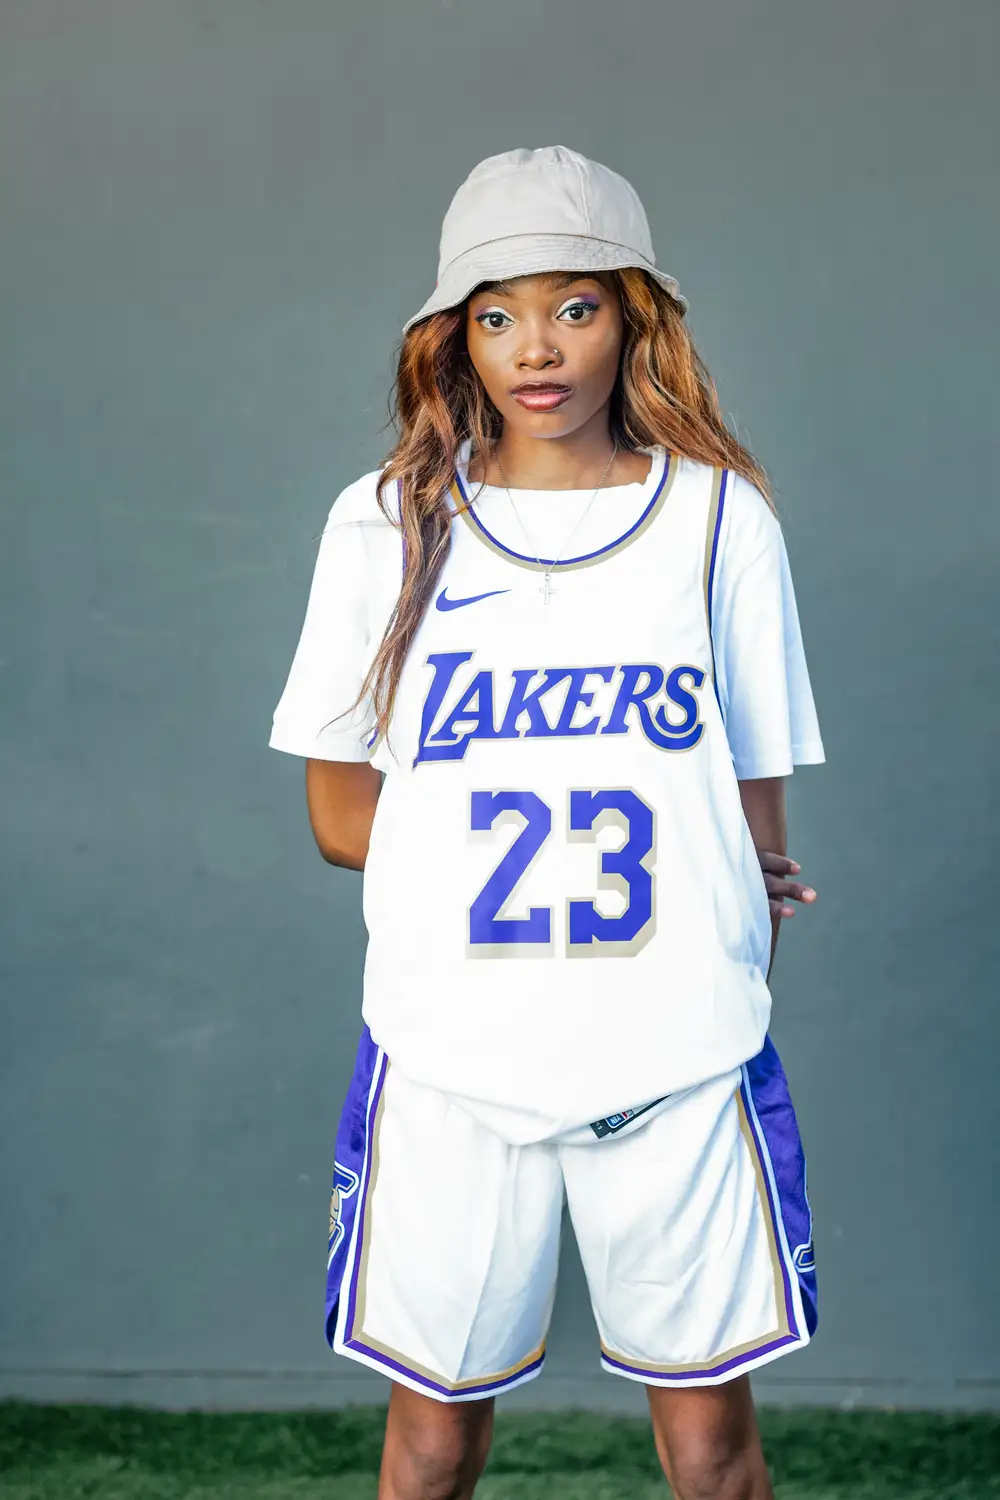 Lakers 23 jersey